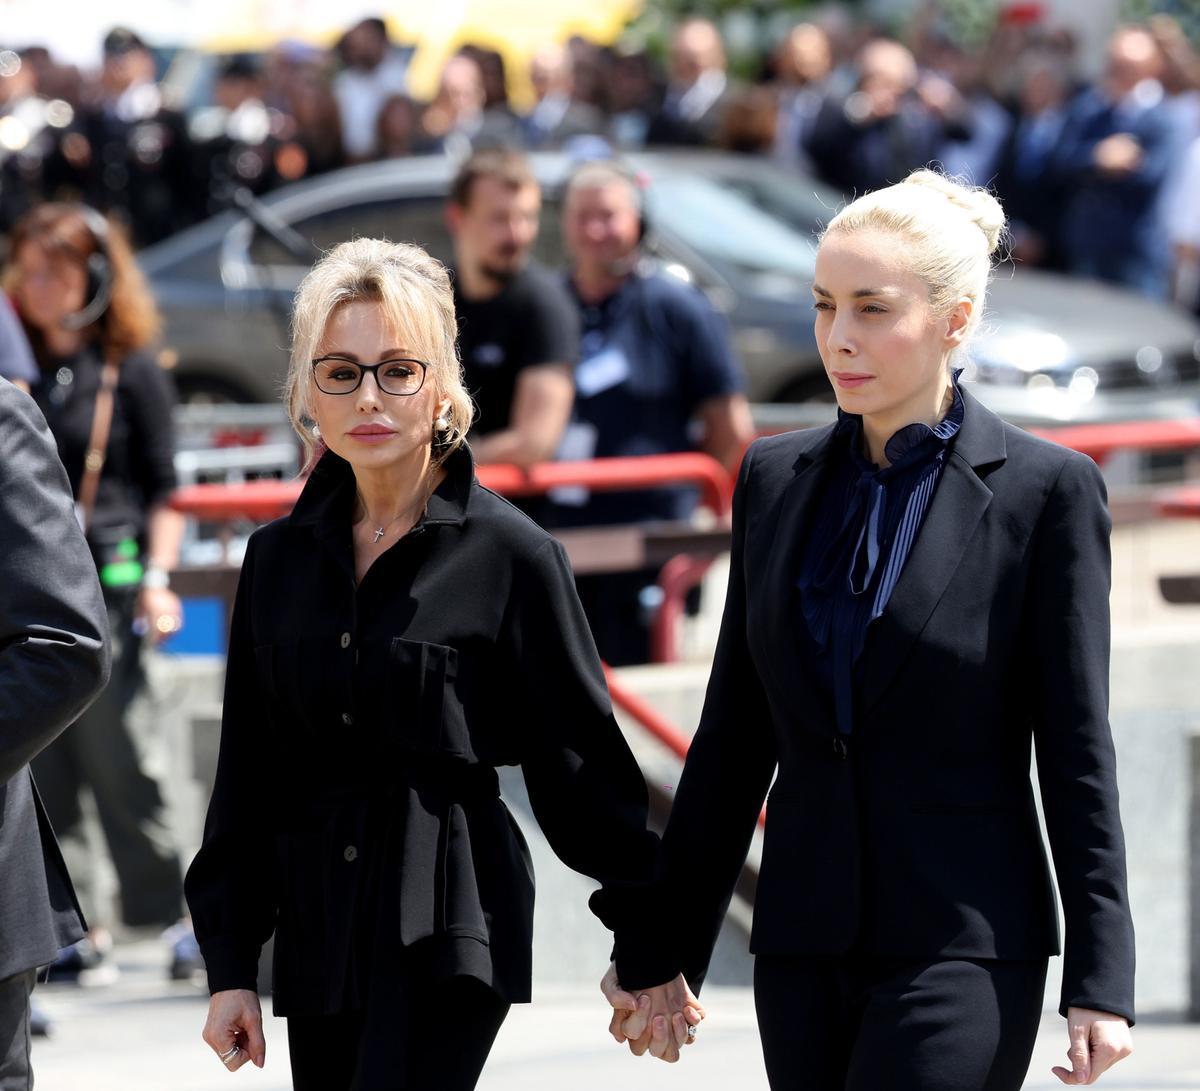 Milan (Italy), 14/06/2023.- Marina Berlusconi (L) and Marta Fascina (R) arrive for the state funeral of Italy’s former prime minister and media mogul Silvio Berlusconi, in Milan, Italy, 14 June 2023. Silvio Berlusconi died at the age of 86 on 12 June 2023 at Milan’s San Raffaele hospital. The Italian media tycoon and Forza Italia (FI) party founder, dubbed as ’Il Cavaliere’ (The Knight), served as prime minister of Italy in four governments. The Italian government has declared 14 June 2023 a national day of mourning. (Italia) EFE/EPA/MATTEO CORNER